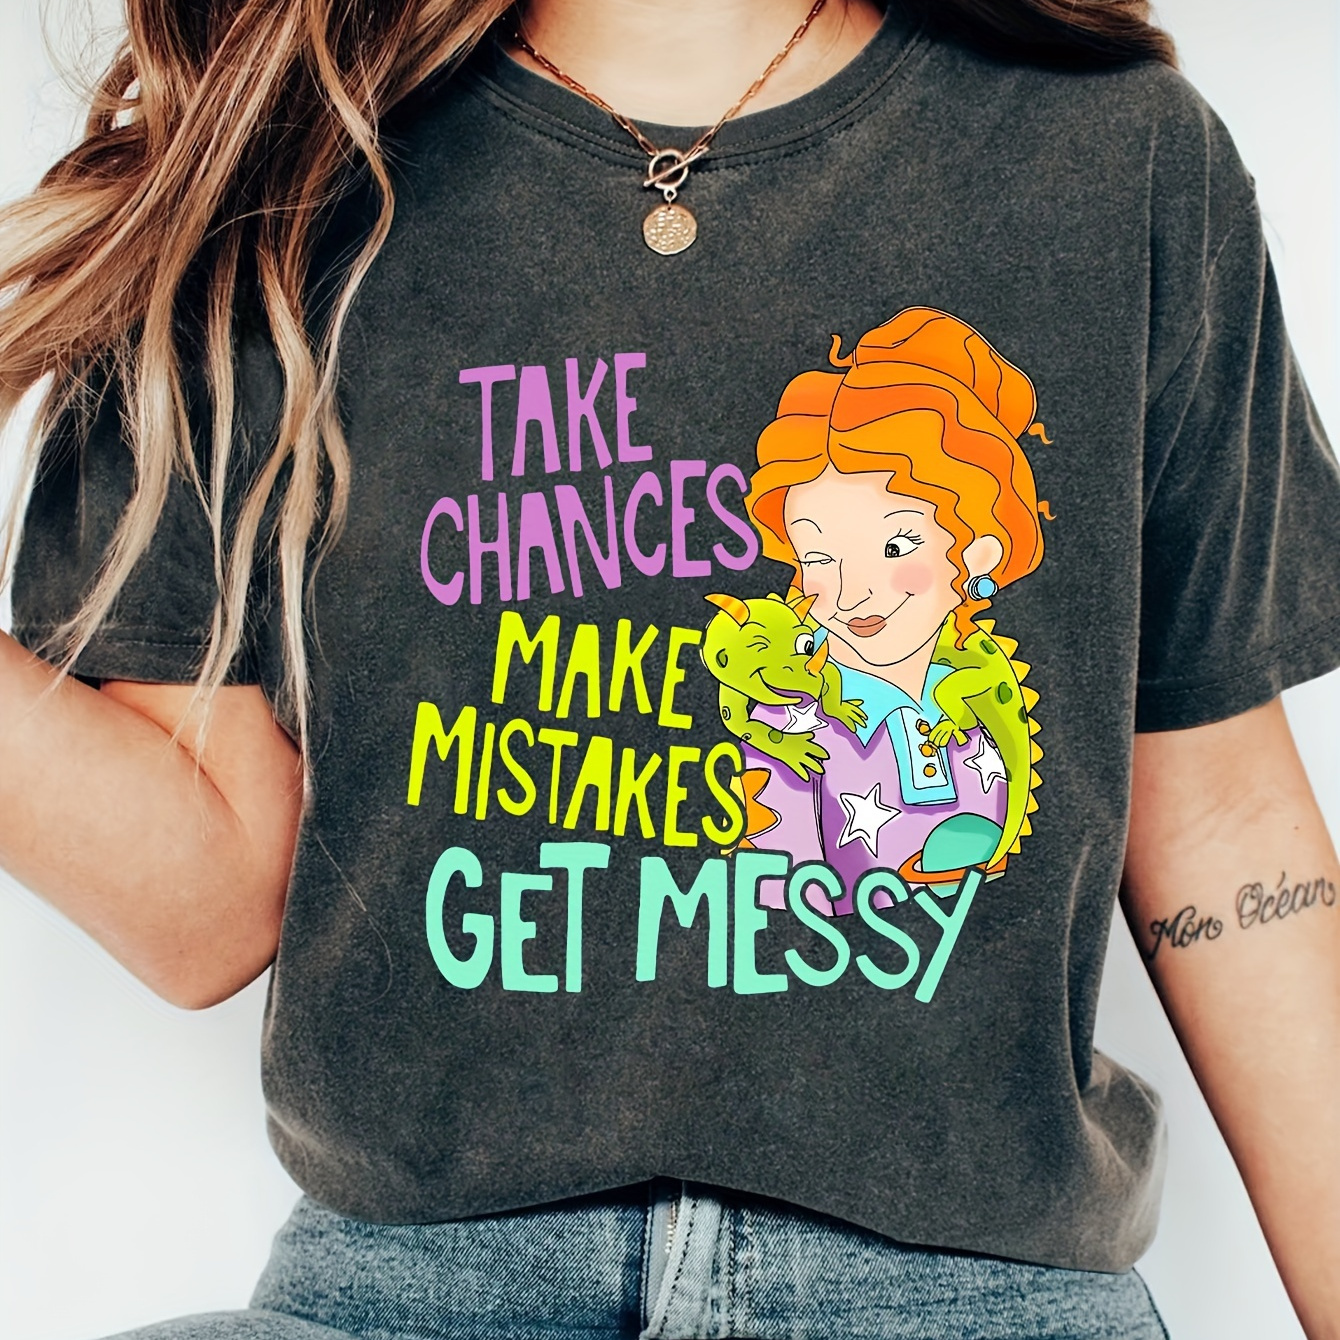 

Take Chances Make Mistakes Print T-shirt, Casual Crew Neck Short Sleeve Top For Spring & Summer, Women's Clothing